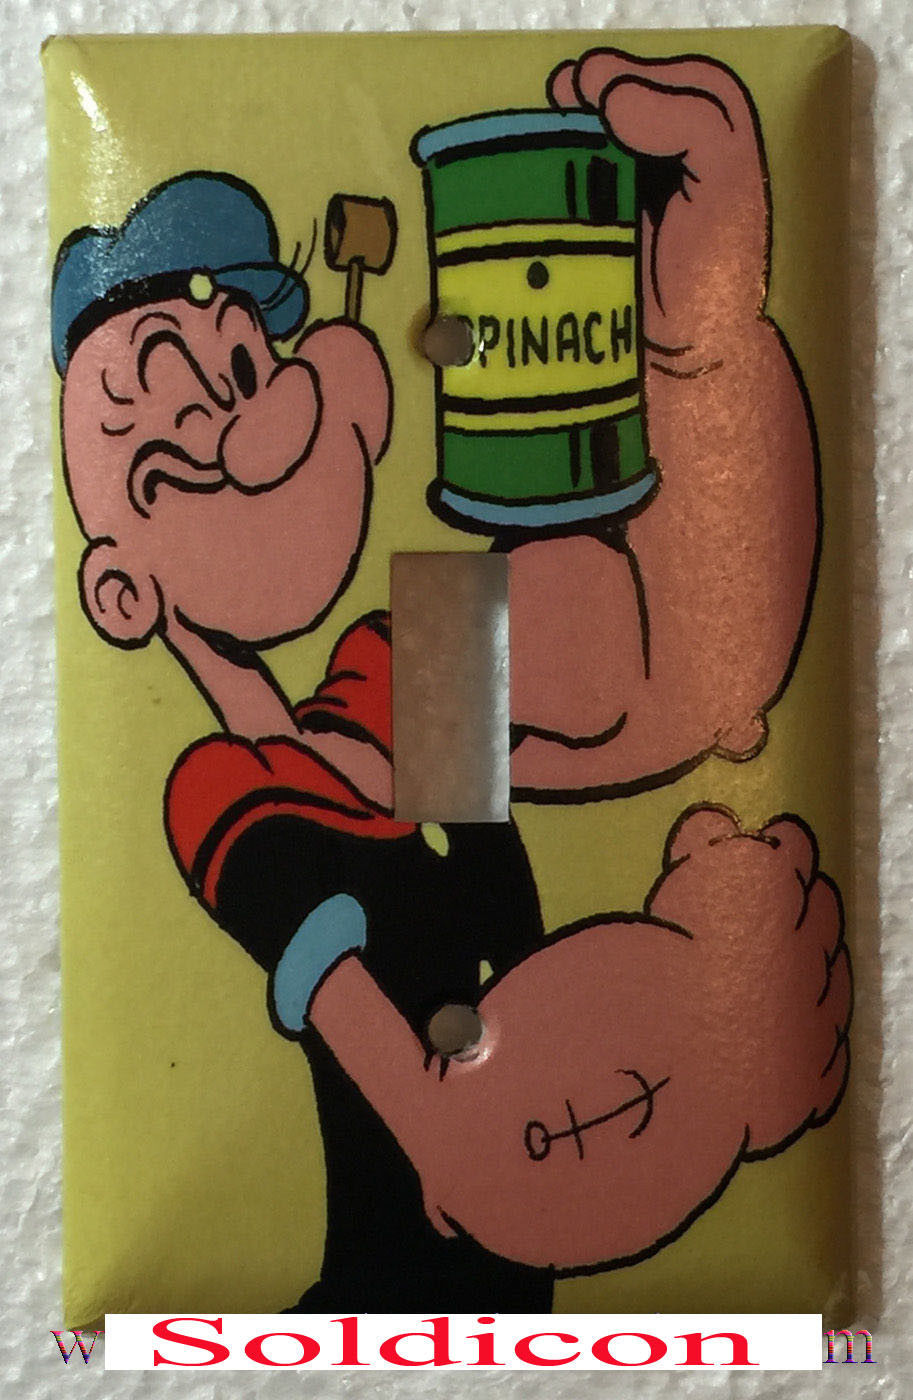 Popeye with Spinach Comic Light Switch Power Outlet Wall Cover Plate Home Decor